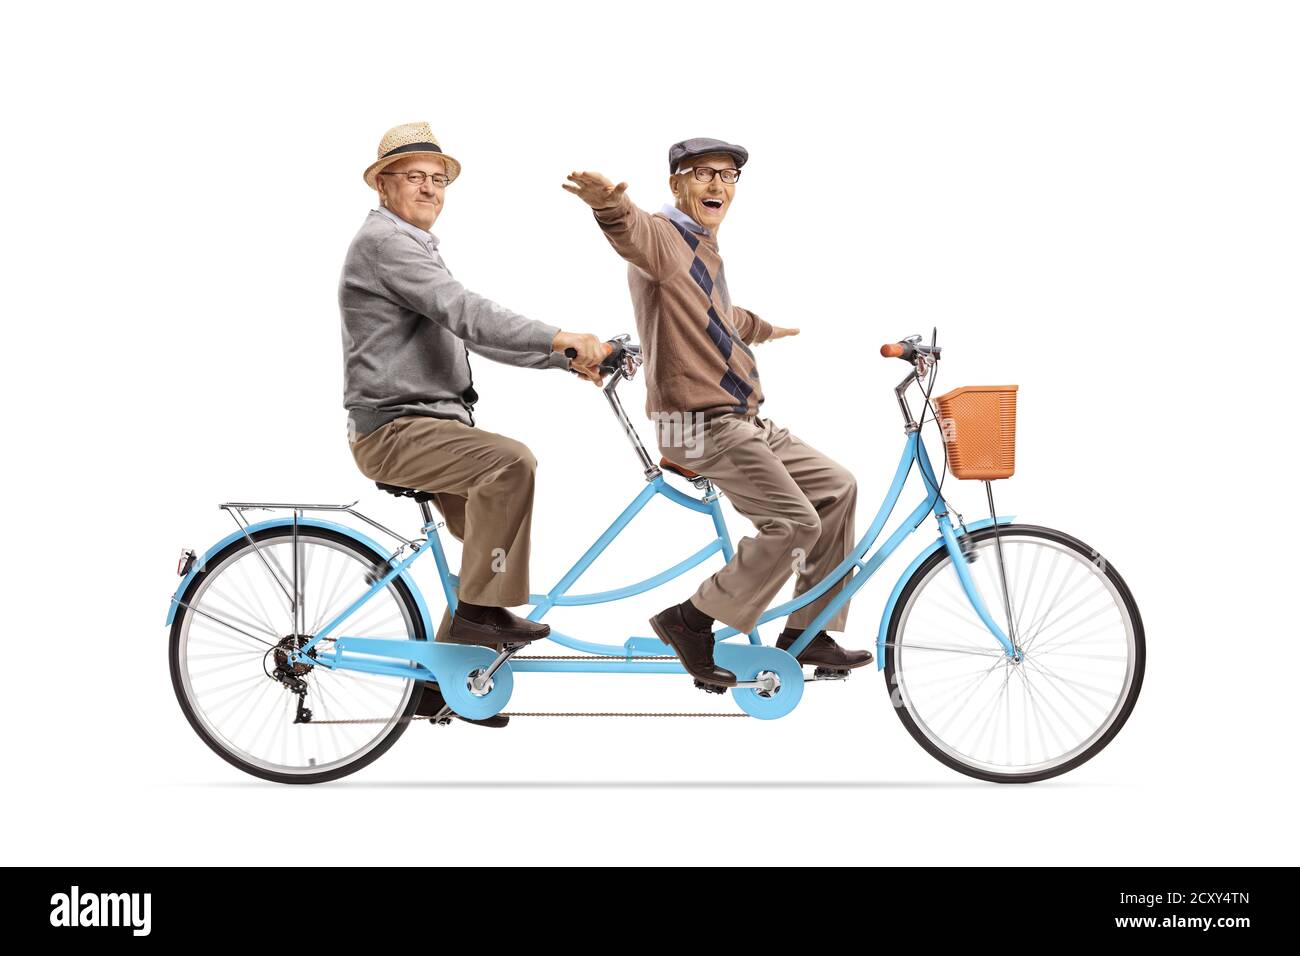 https://c8.alamy.com/comp/2CXY4TN/cheerful-elderly-men-on-a-tandem-bicycle-isolated-on-white-background-2CXY4TN.jpg